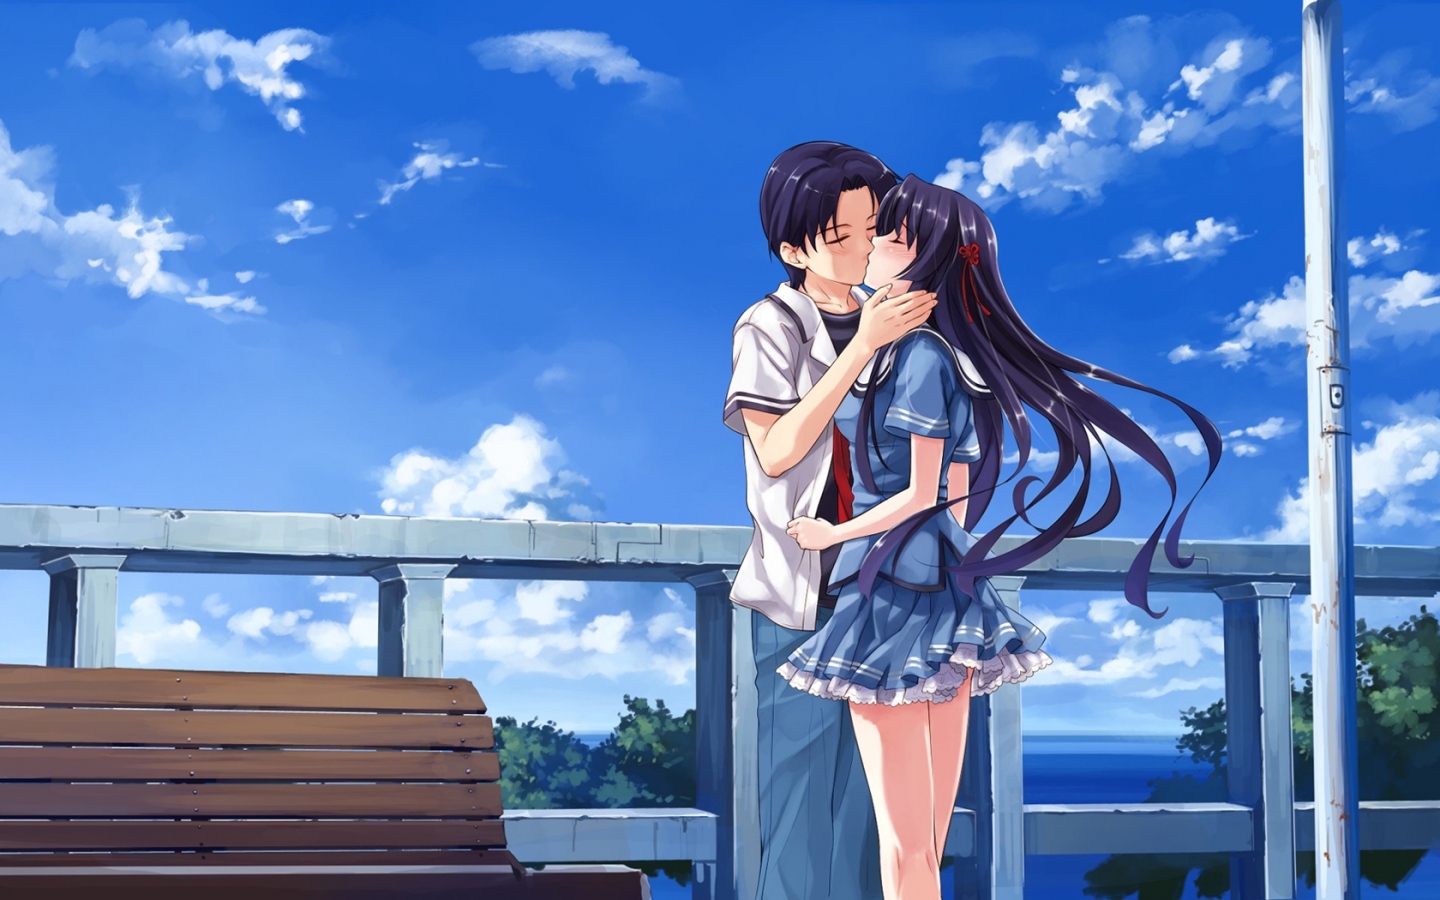 1,860 Anime Kiss Images, Stock Photos & Vectors | Shutterstock